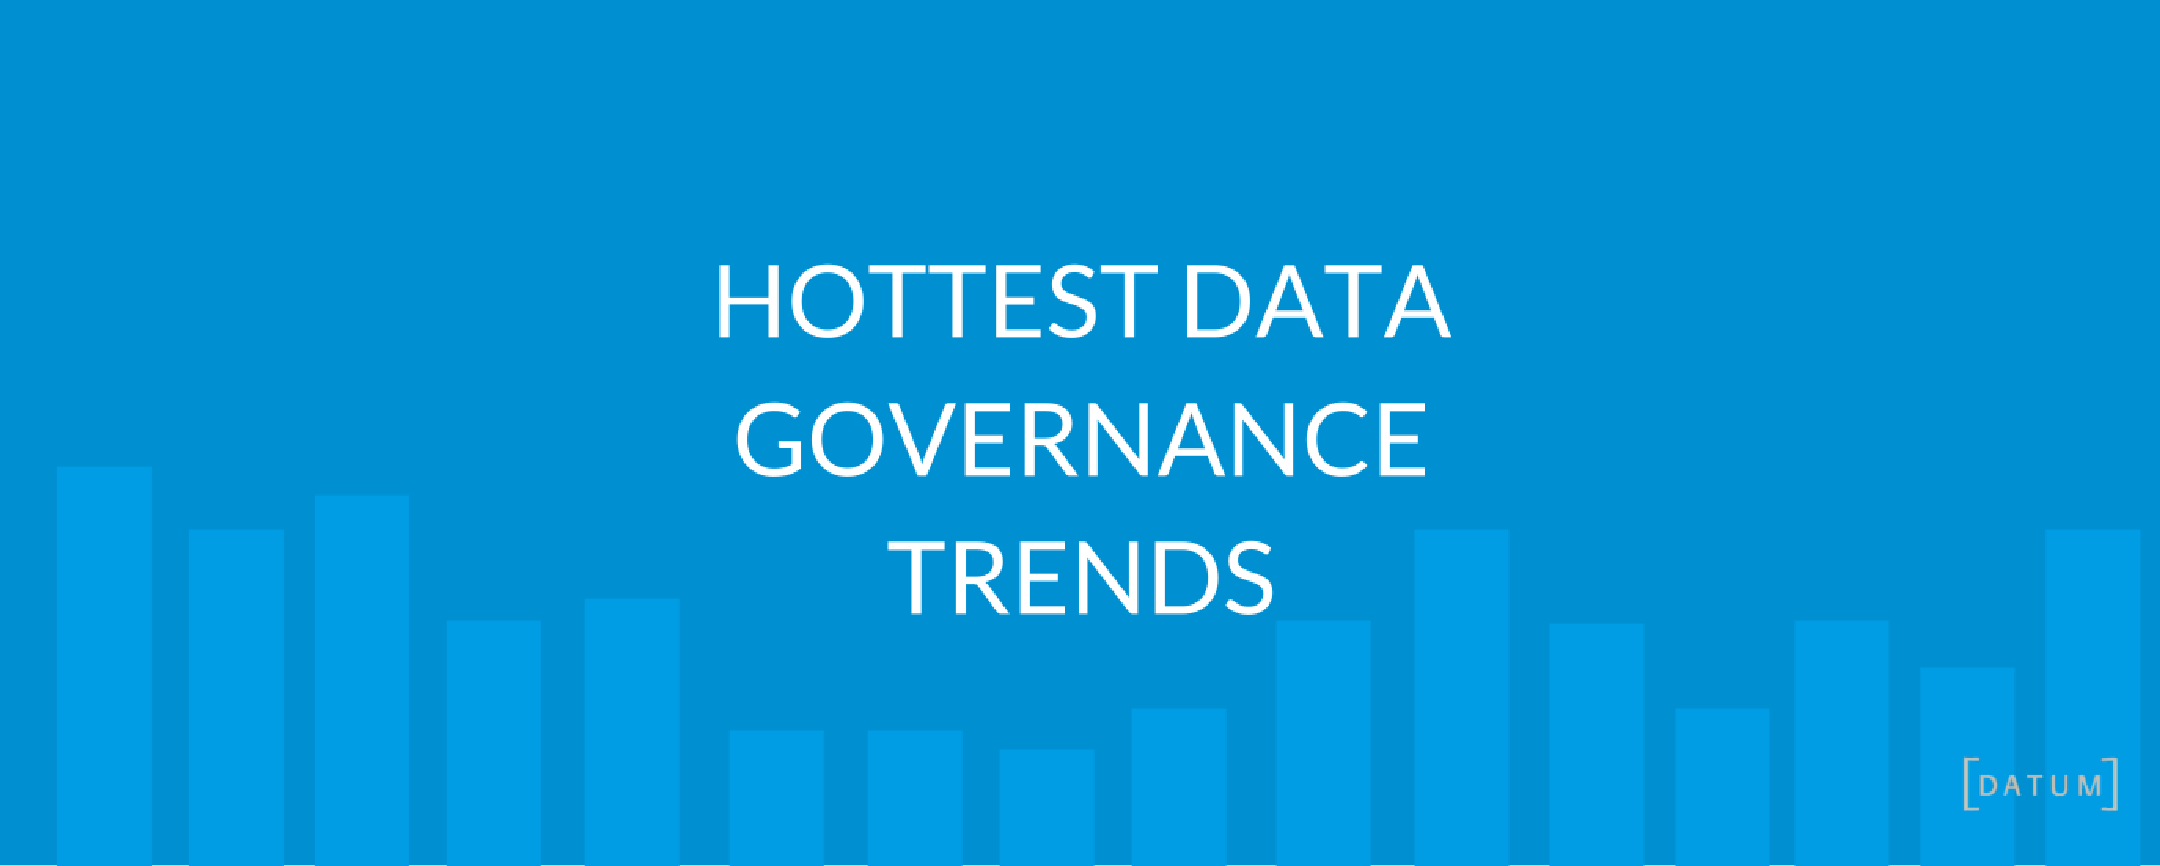 Hottest Data Governance Trends You Need to Know for 2017